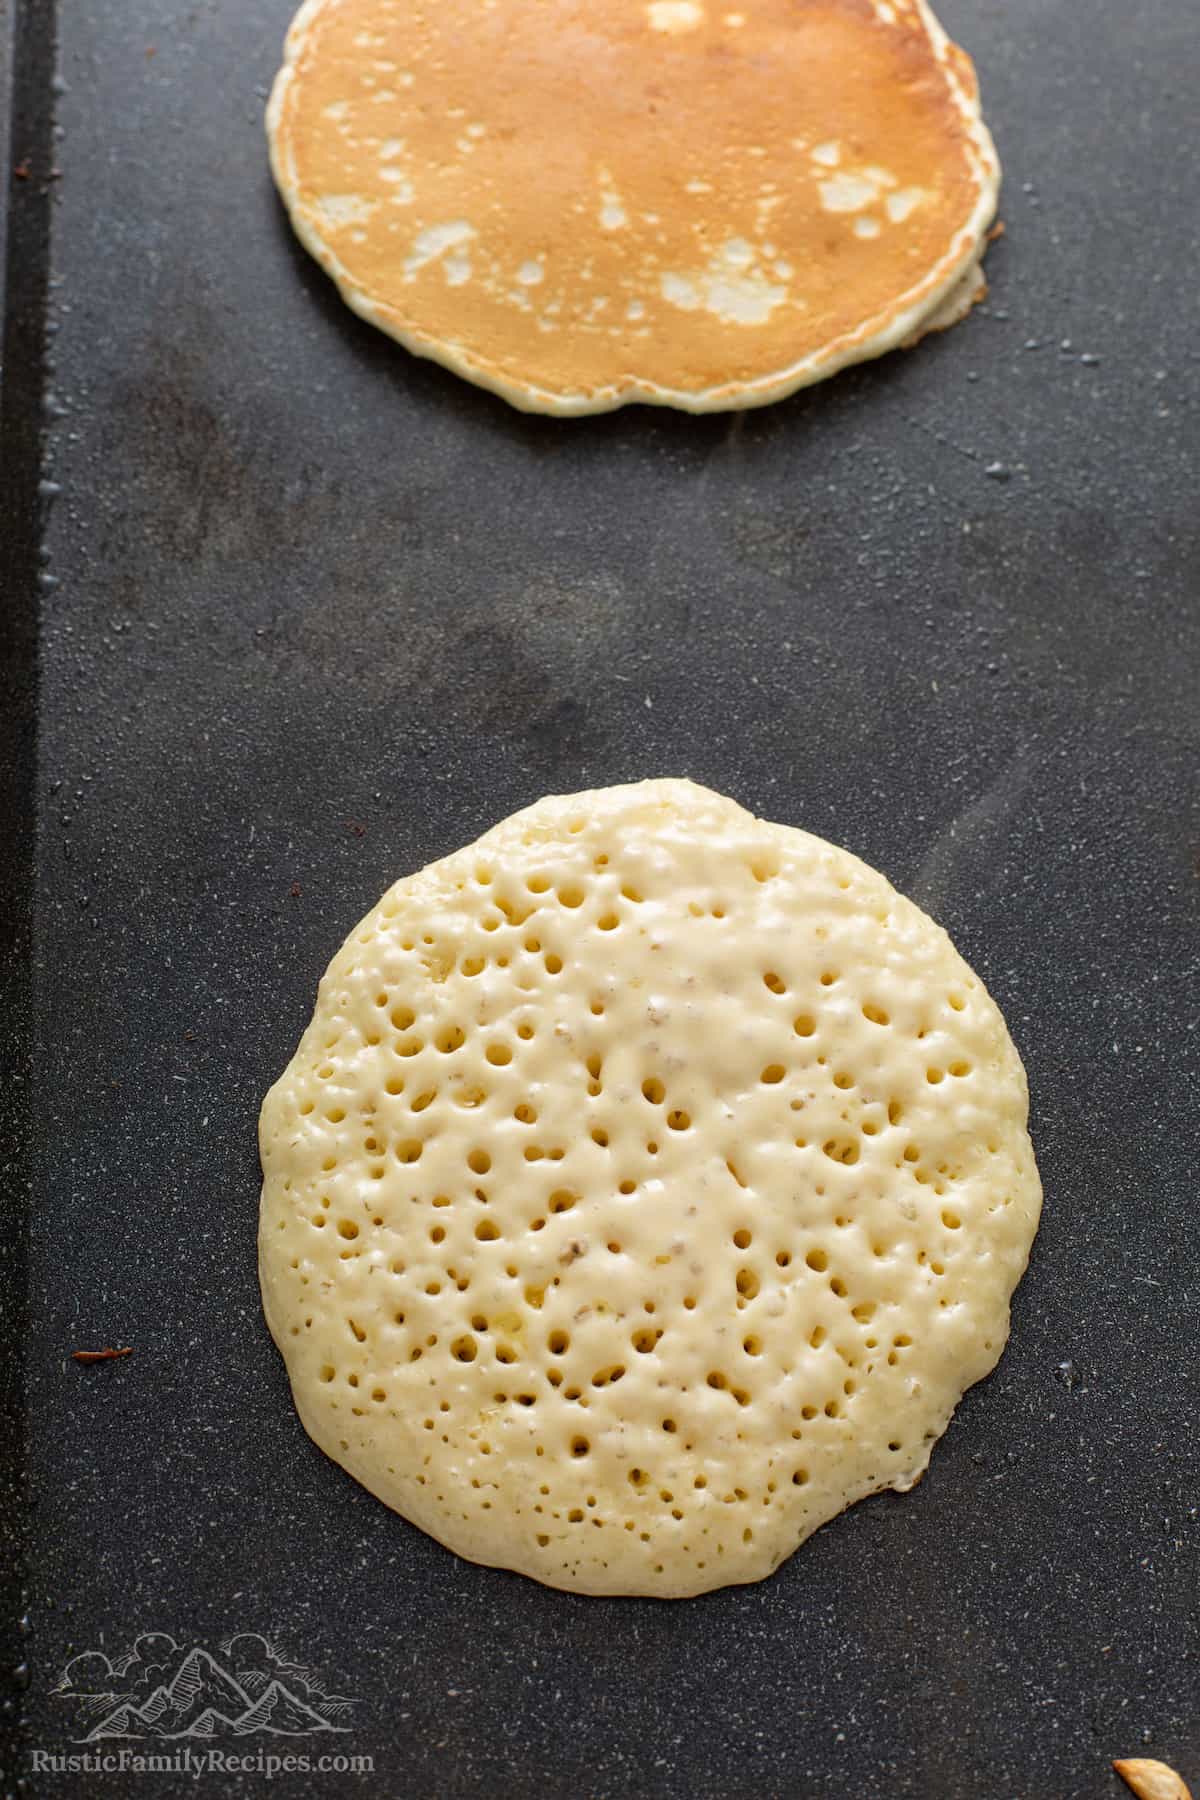 Fluffy pancakes being cooked on a griddle